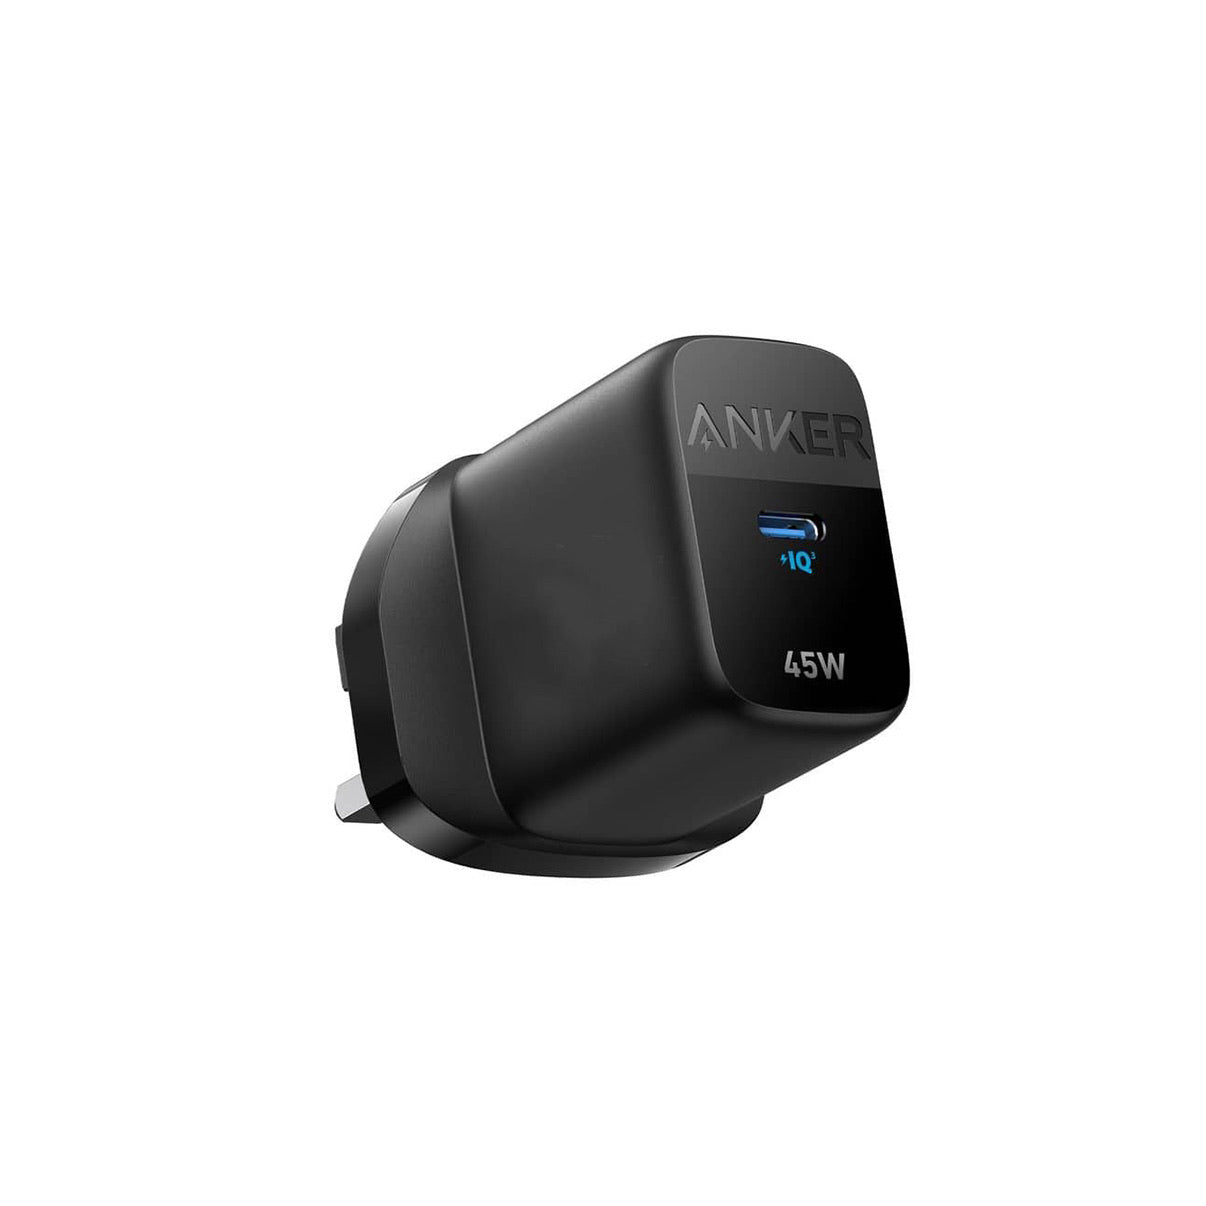 Anker 313 Charger (Ace, 45W) - Anker US